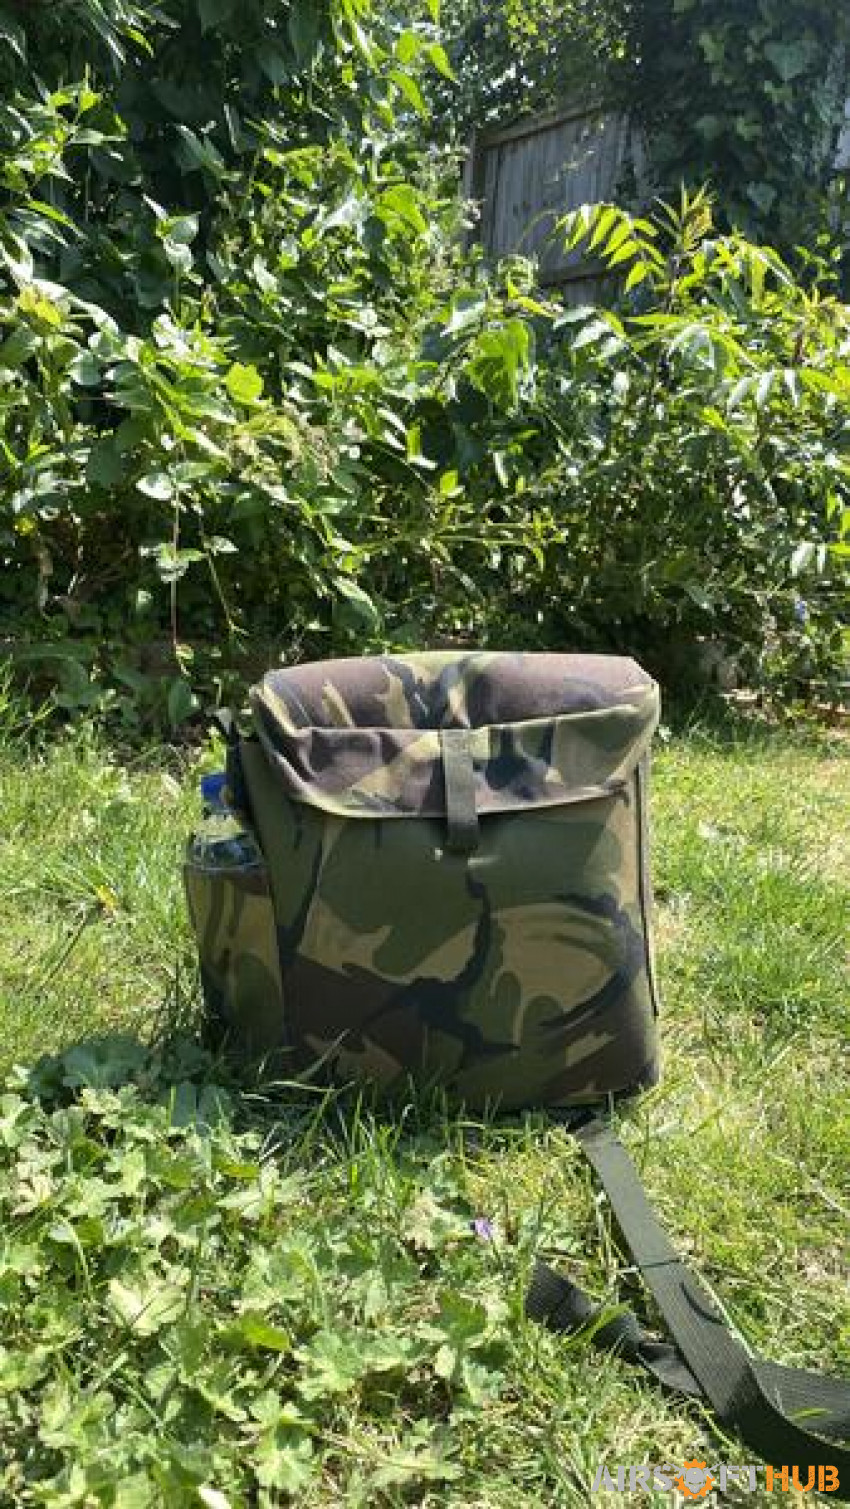 Field pack DPM - Used airsoft equipment